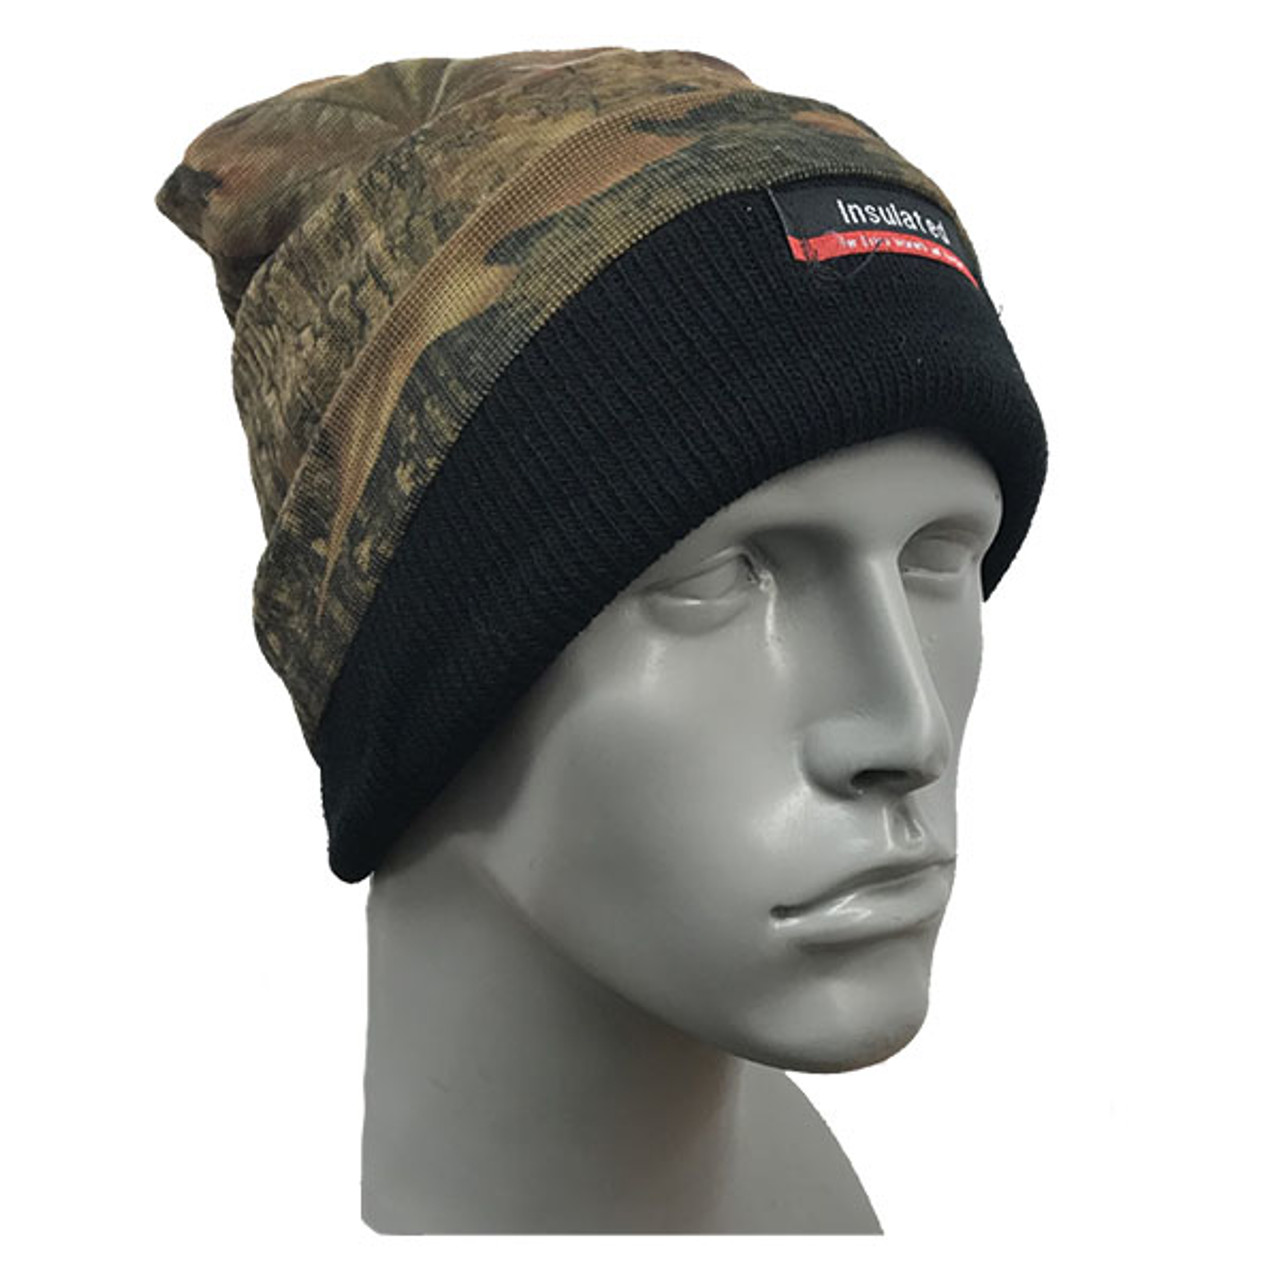 Insulated Reversible Camo / Orange Knit Hat - The Glove Warehouse